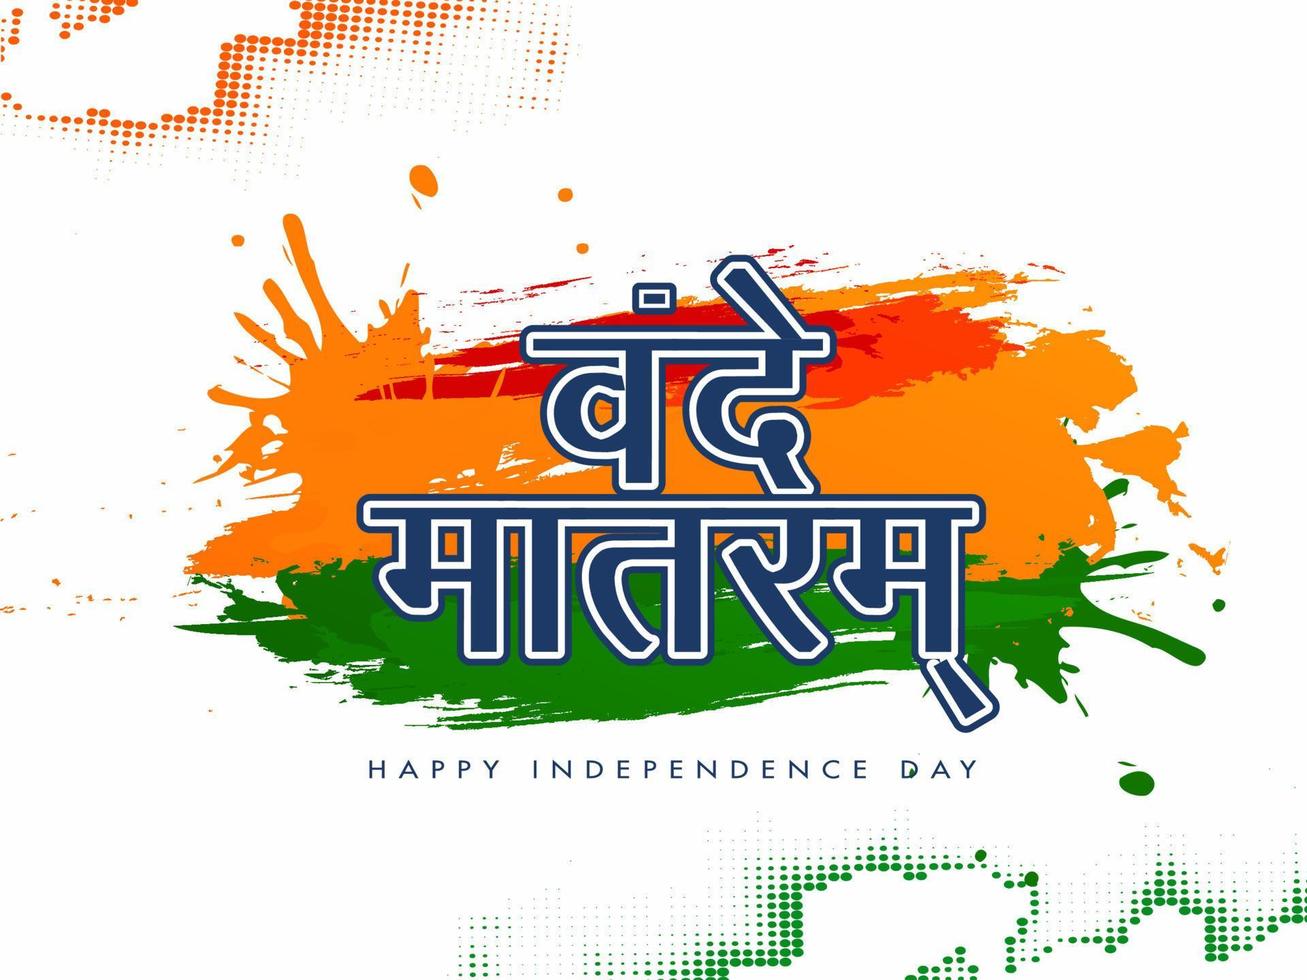 Hindi Text Vande Mataram with Saffron and Green Brush Stroke Splash Effect on White Background for Happy Independence Day Celebration. vector